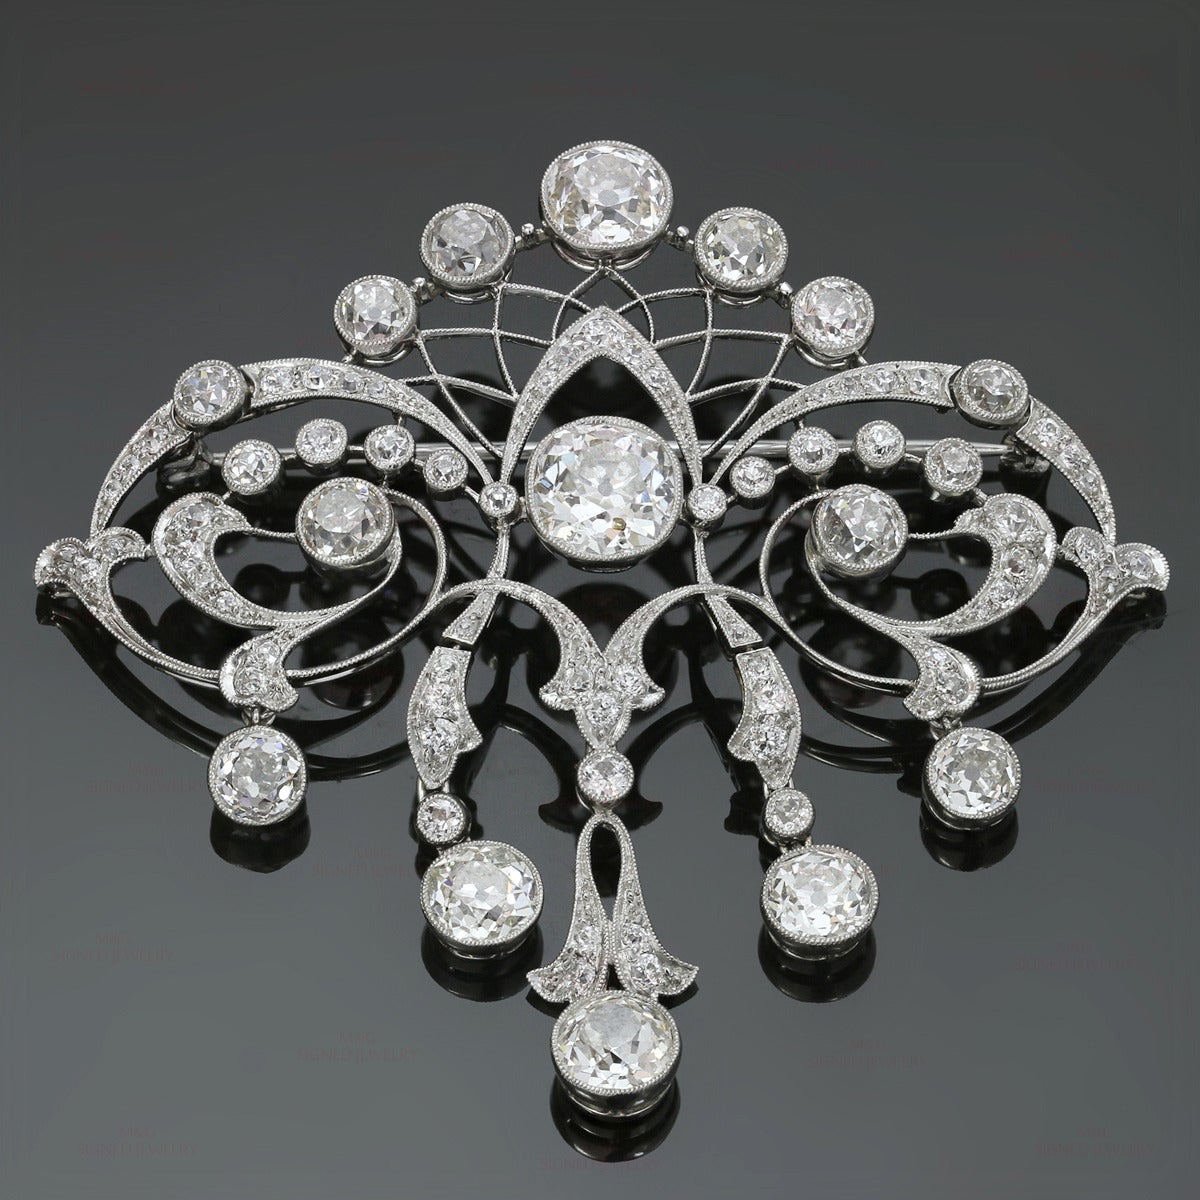 This delicate Edwardian filigree brooch is made in fine platinum and beautifully set with old mine-cut diamonds: a center H-I SI diamond of 2 carats, a top H-I VS2-SI1 diamond of 1.20 carats, a bottom H-I VS2-SI1 diamond of 1.10 carats, 2 bottom H-I